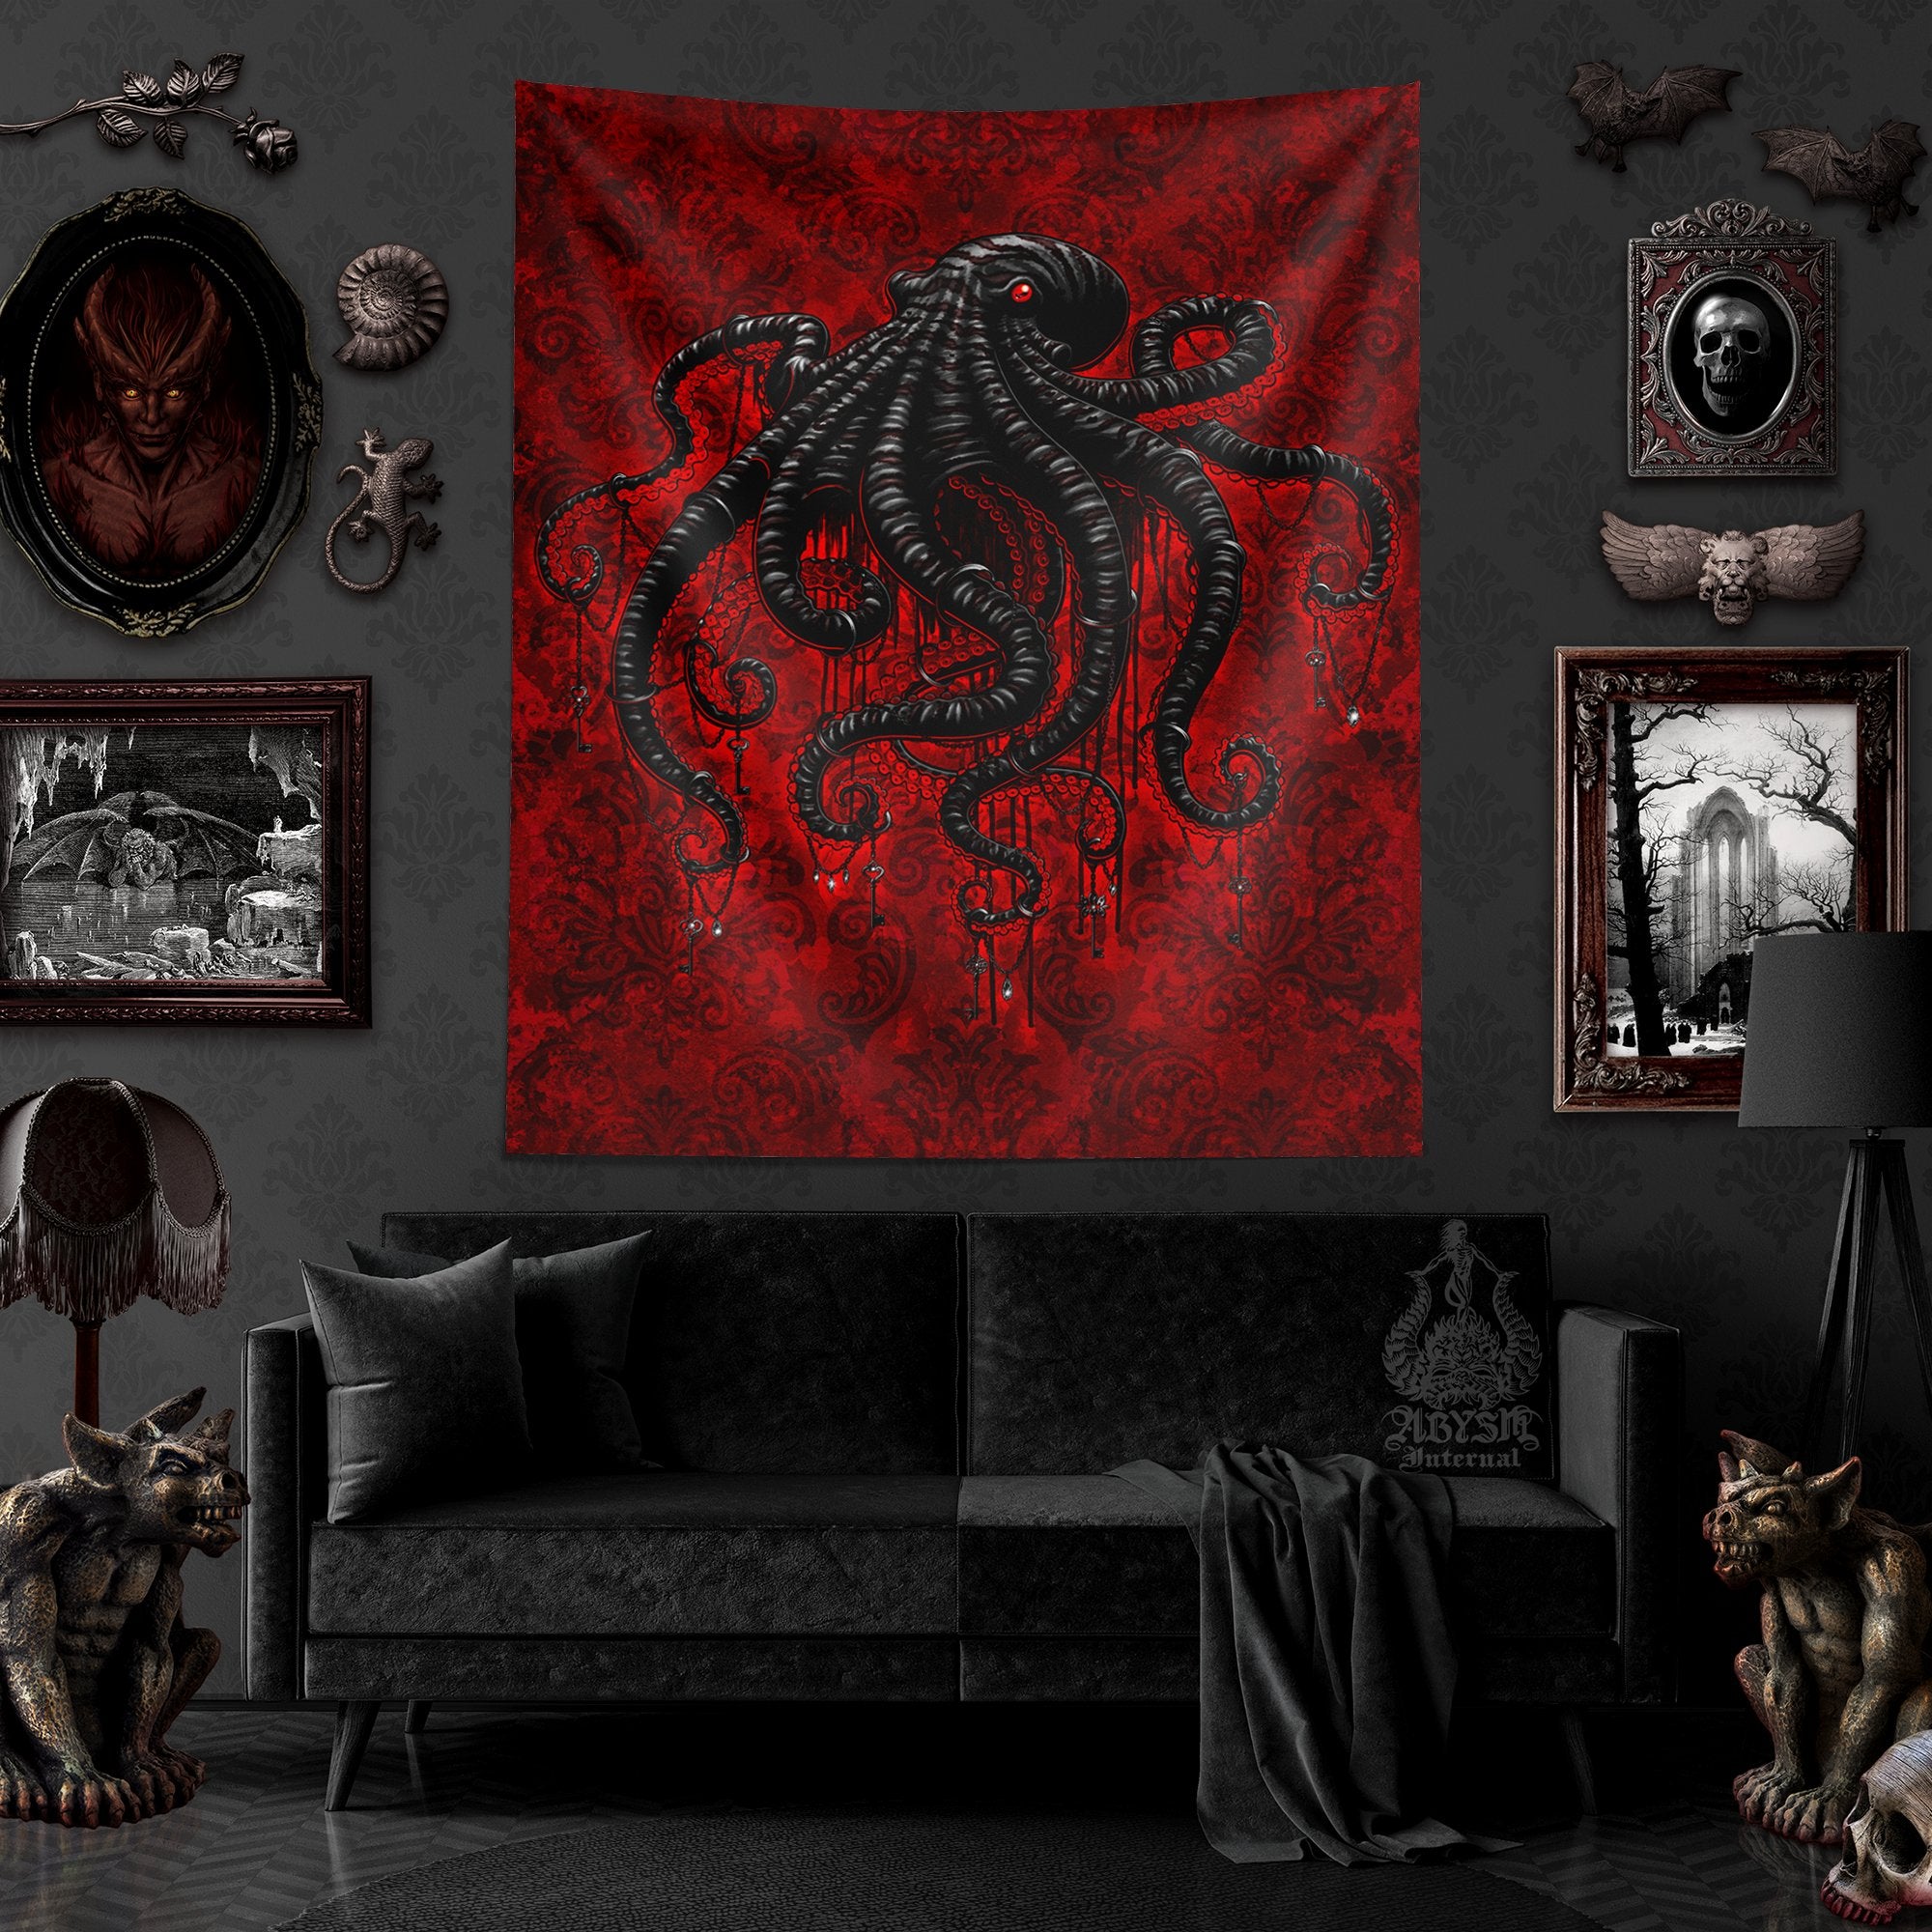 Bloody Gothic Tapestry, Octopus Wall Hanging, Goth Home Decor, Vertical Art Print - Red Black - Abysm Internal